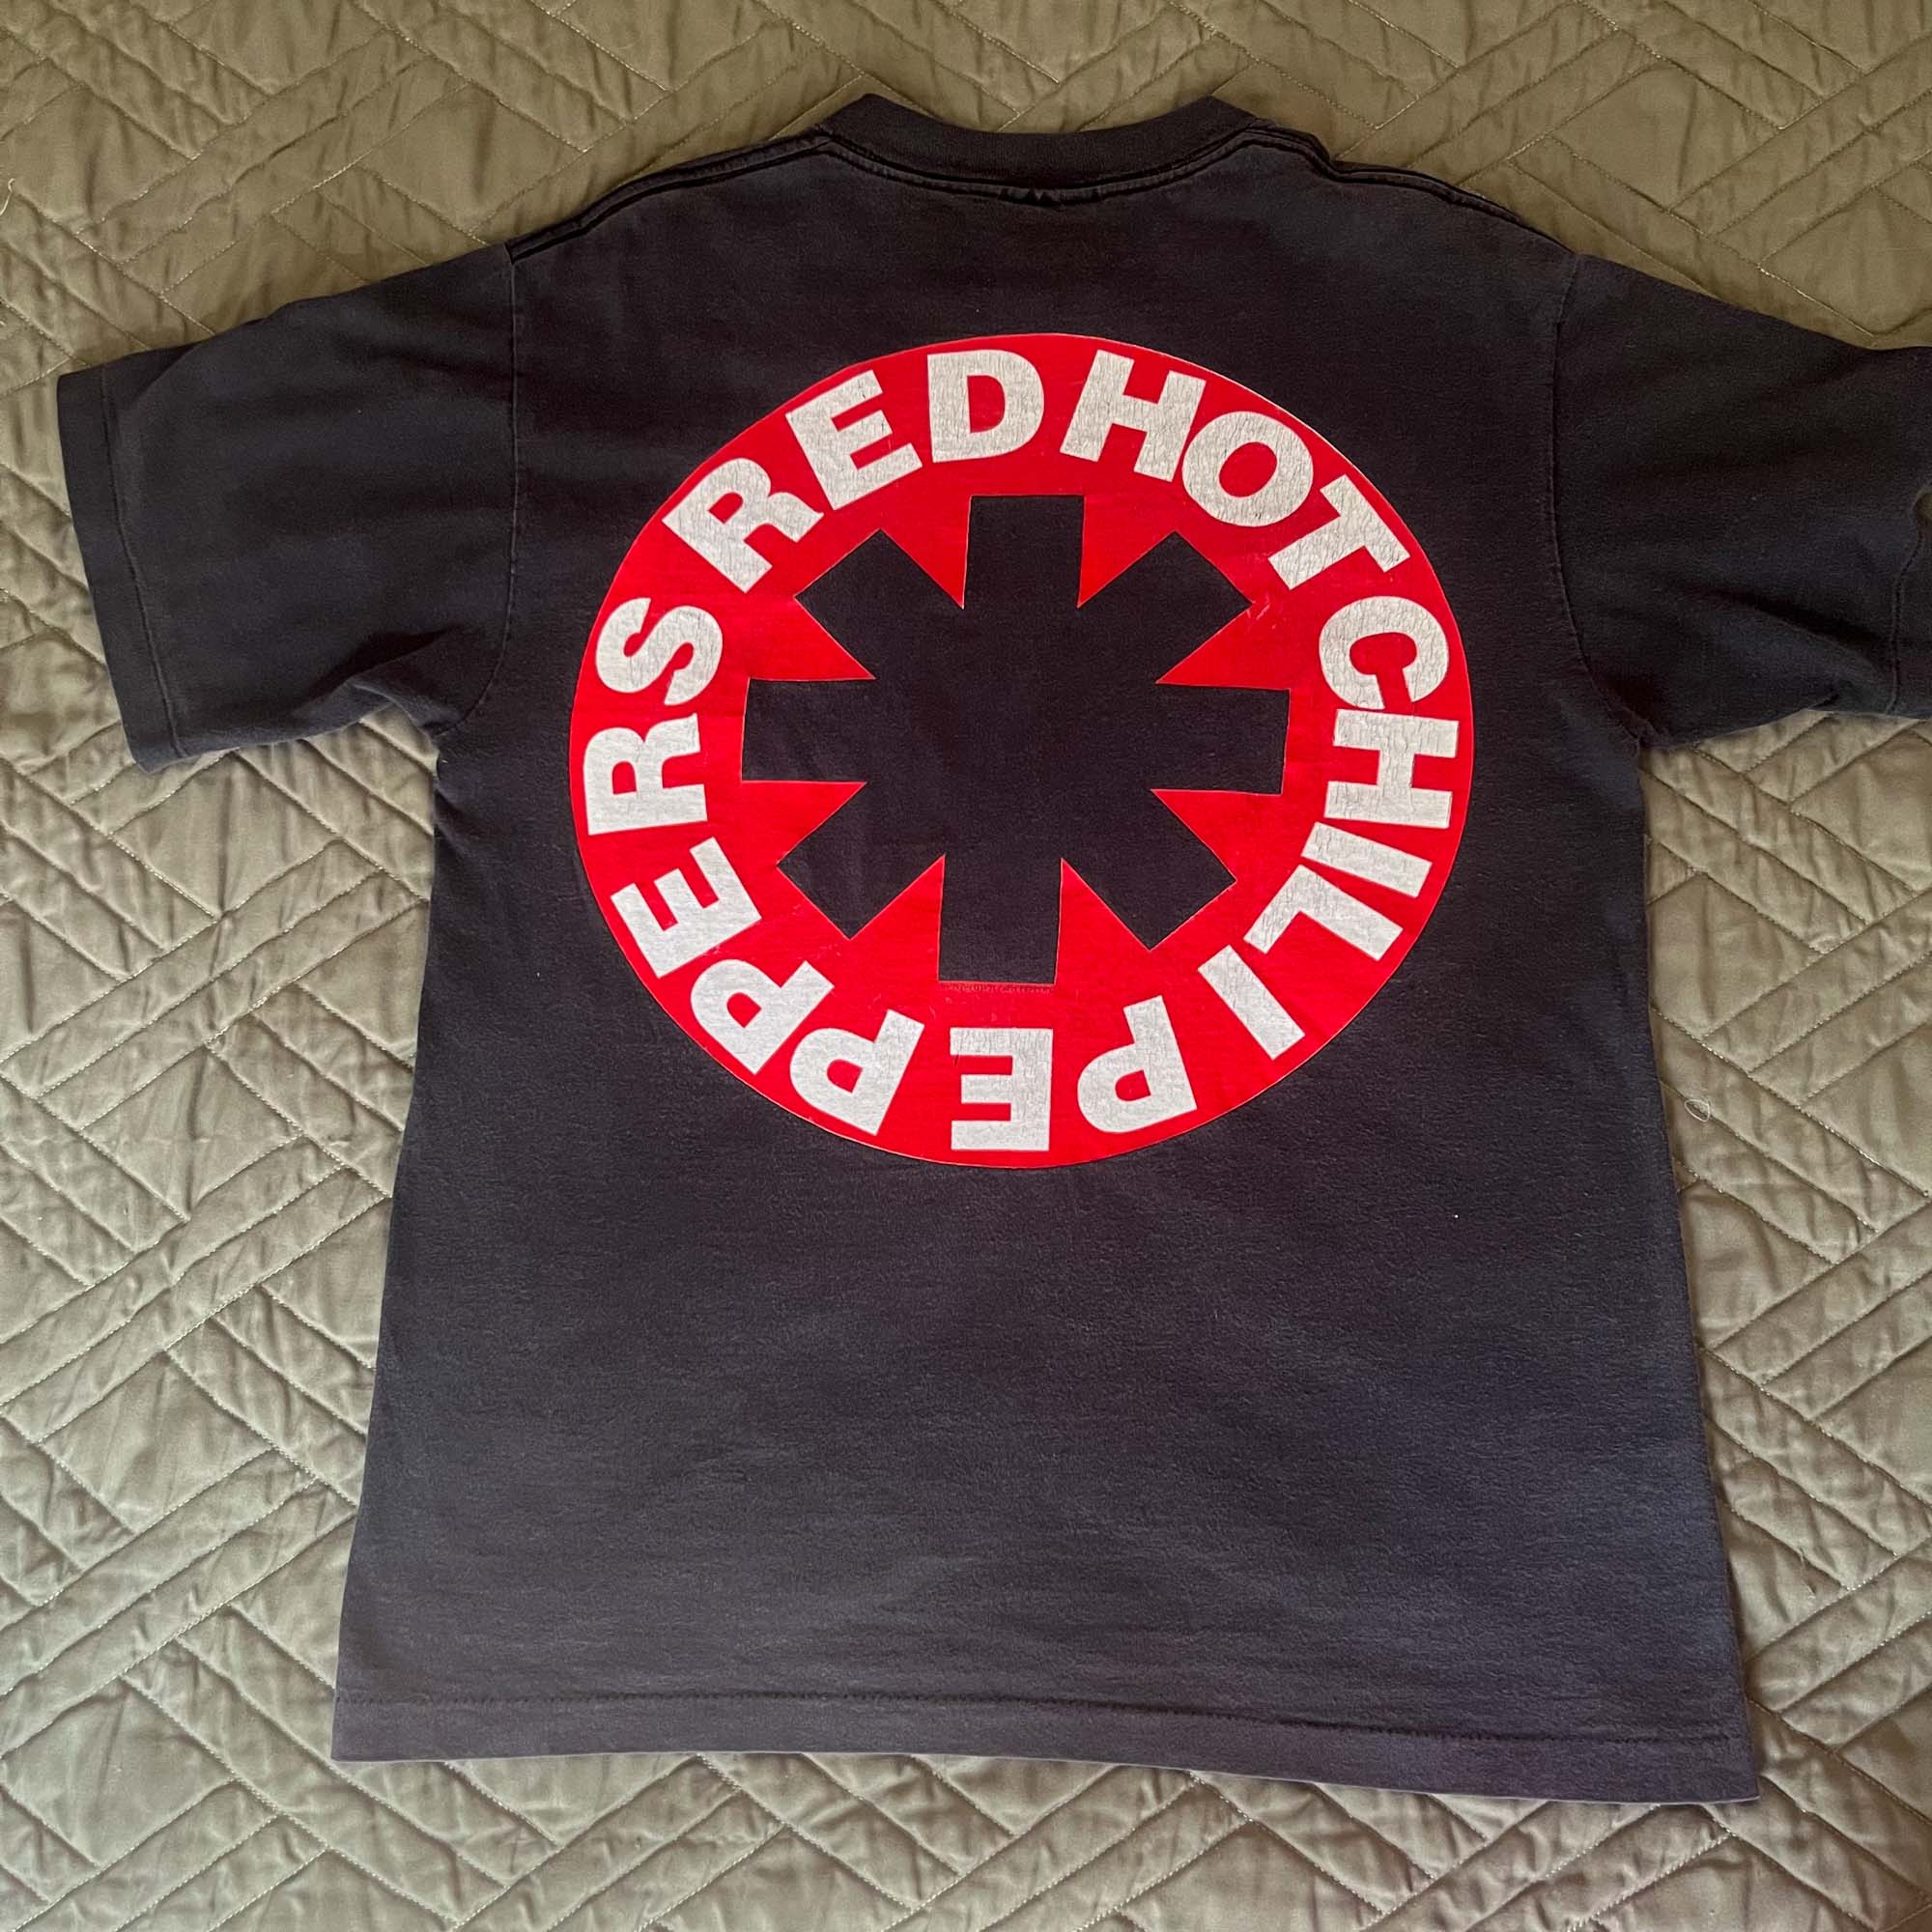 VINTAGE RED HOT CHILI PEPPERS TSHIRT : RHCP OG OWNER TEE